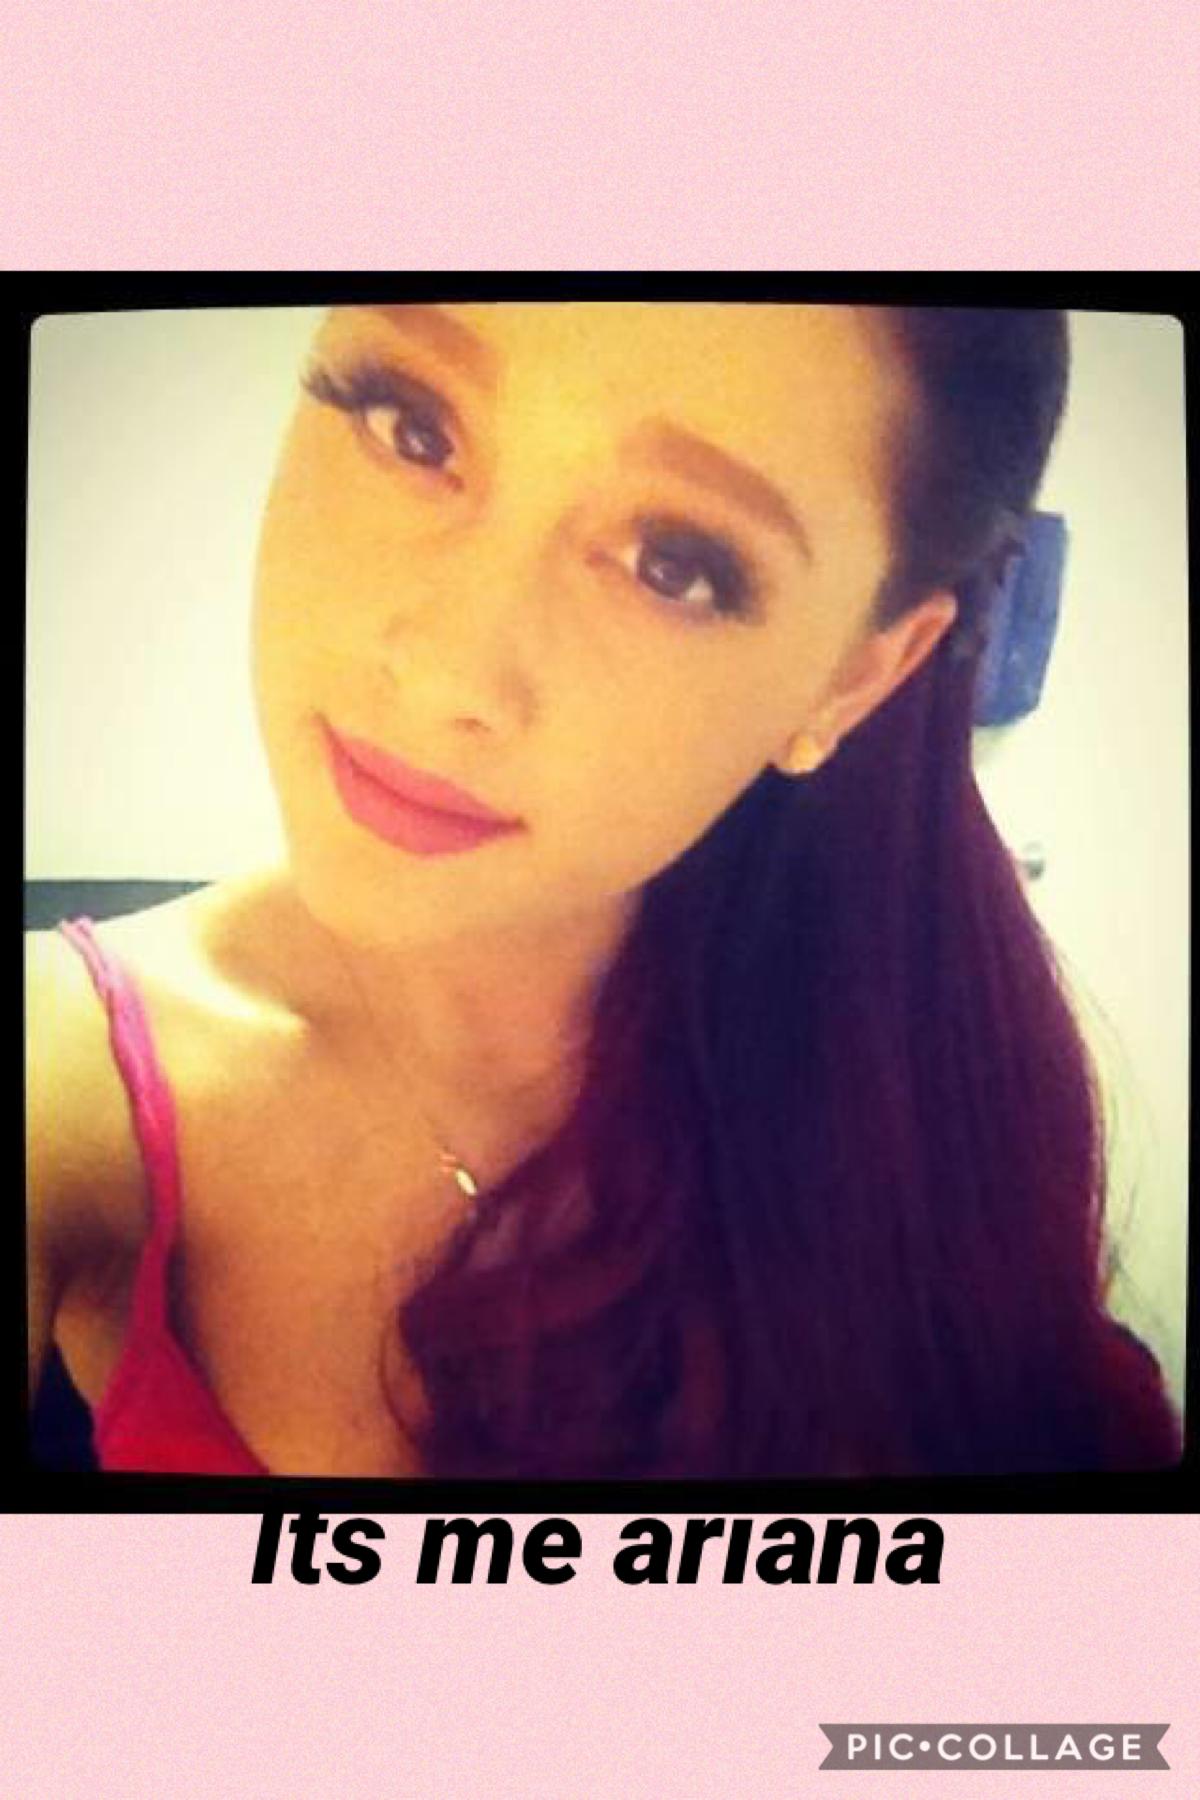 #ariana grande whats up fans at home!!!!!